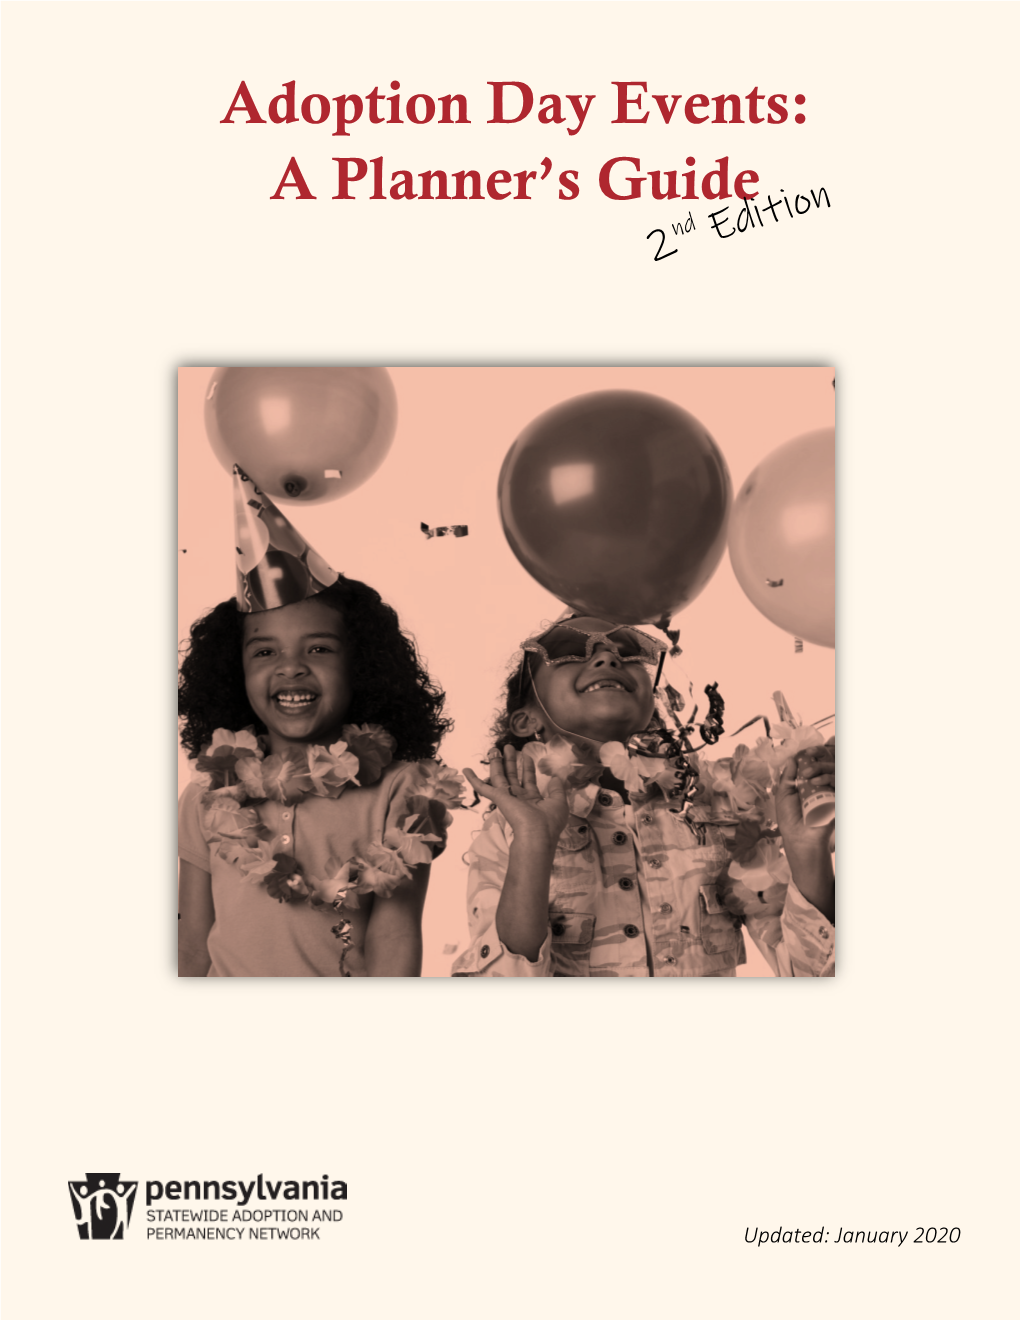 Adoption Day Events: a Planner's Guide